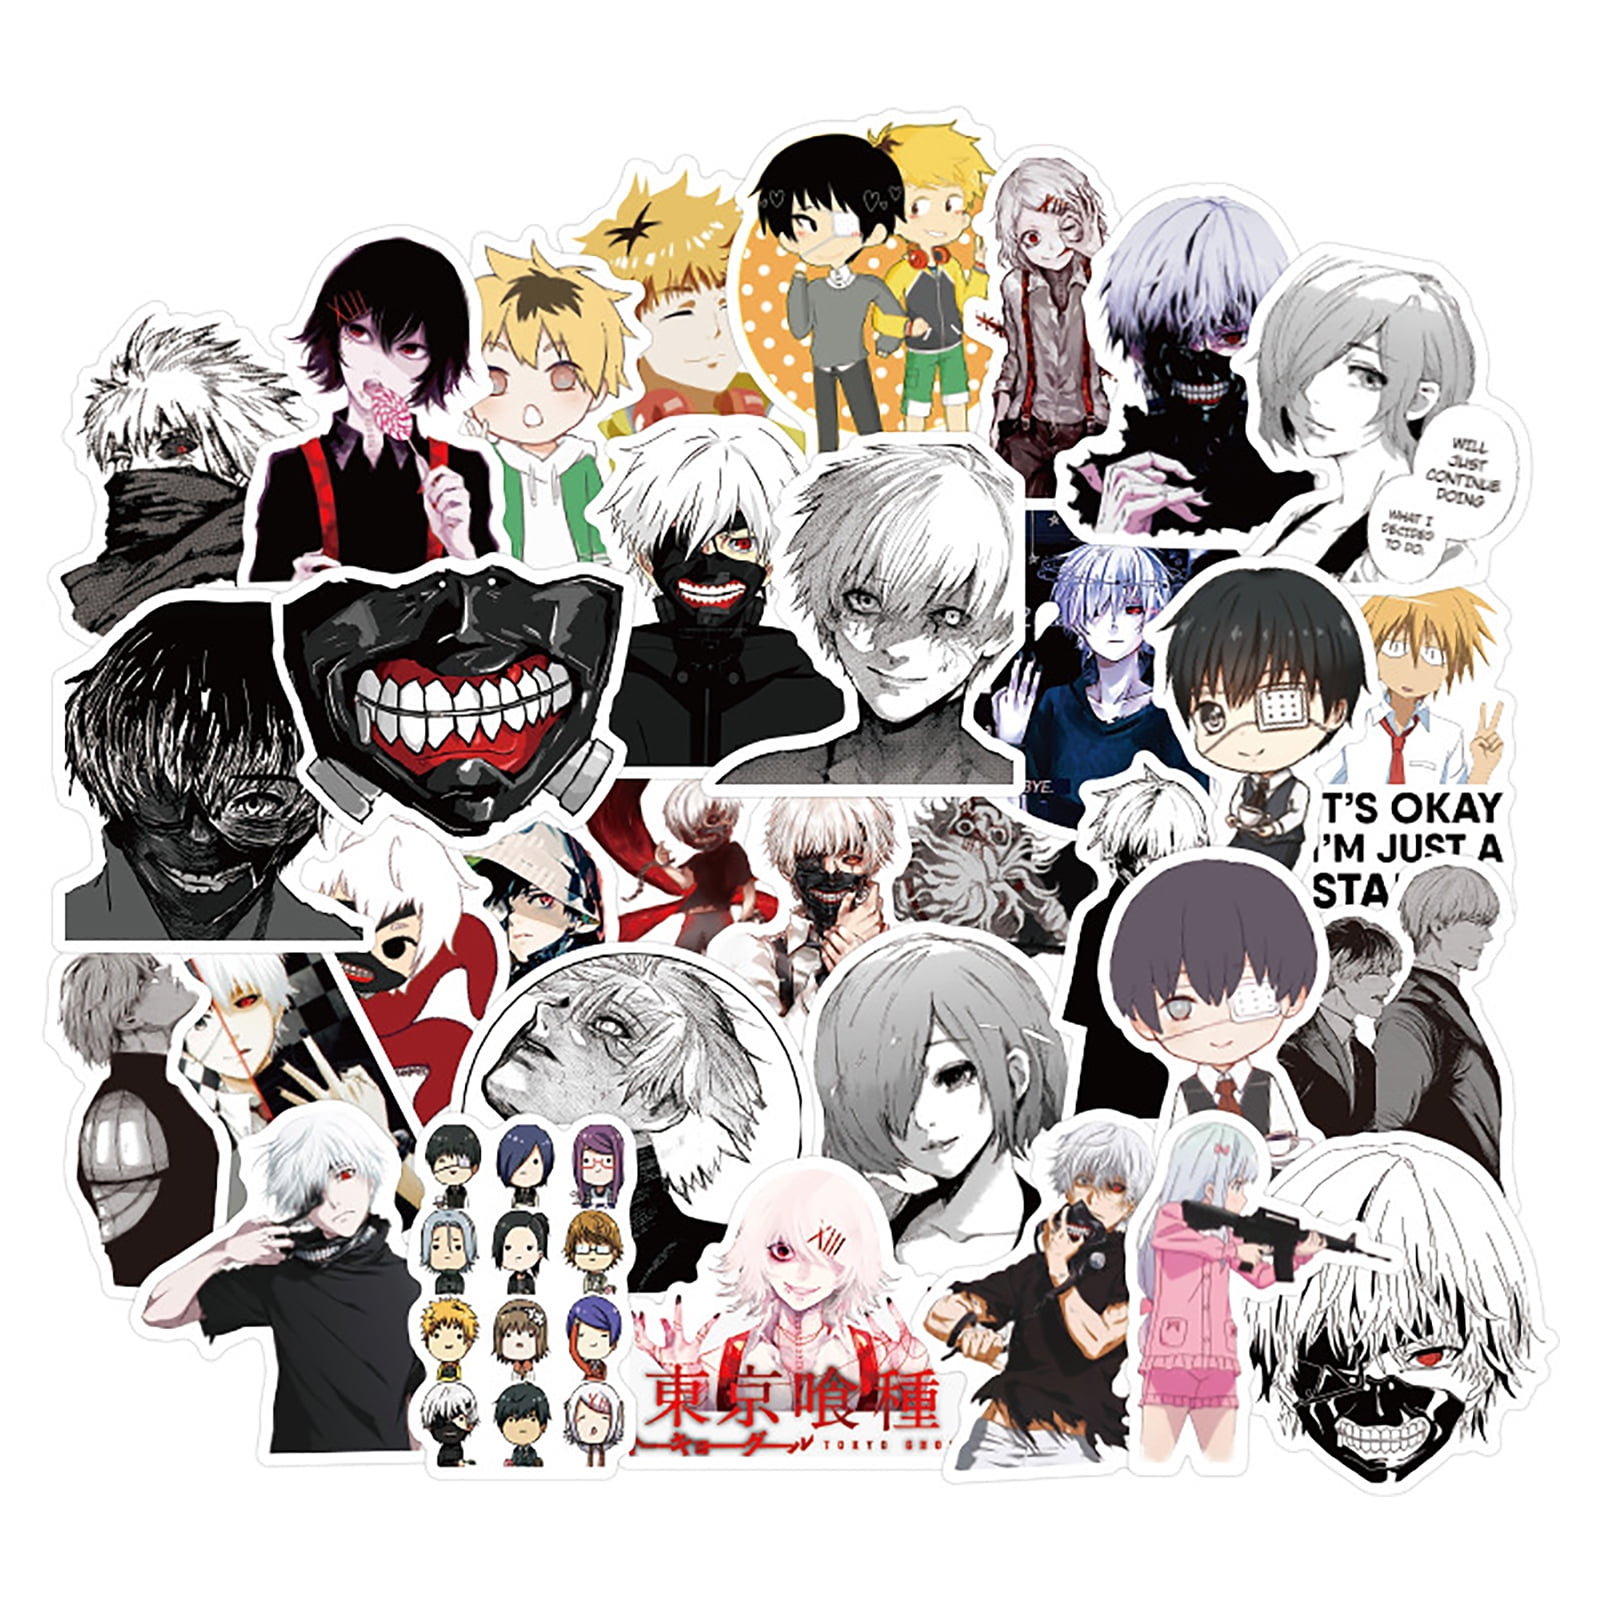 52 Pcs Tokyo Ghoul Sticker Anime Stickers Waterproof Not Repeating Stickers xk 